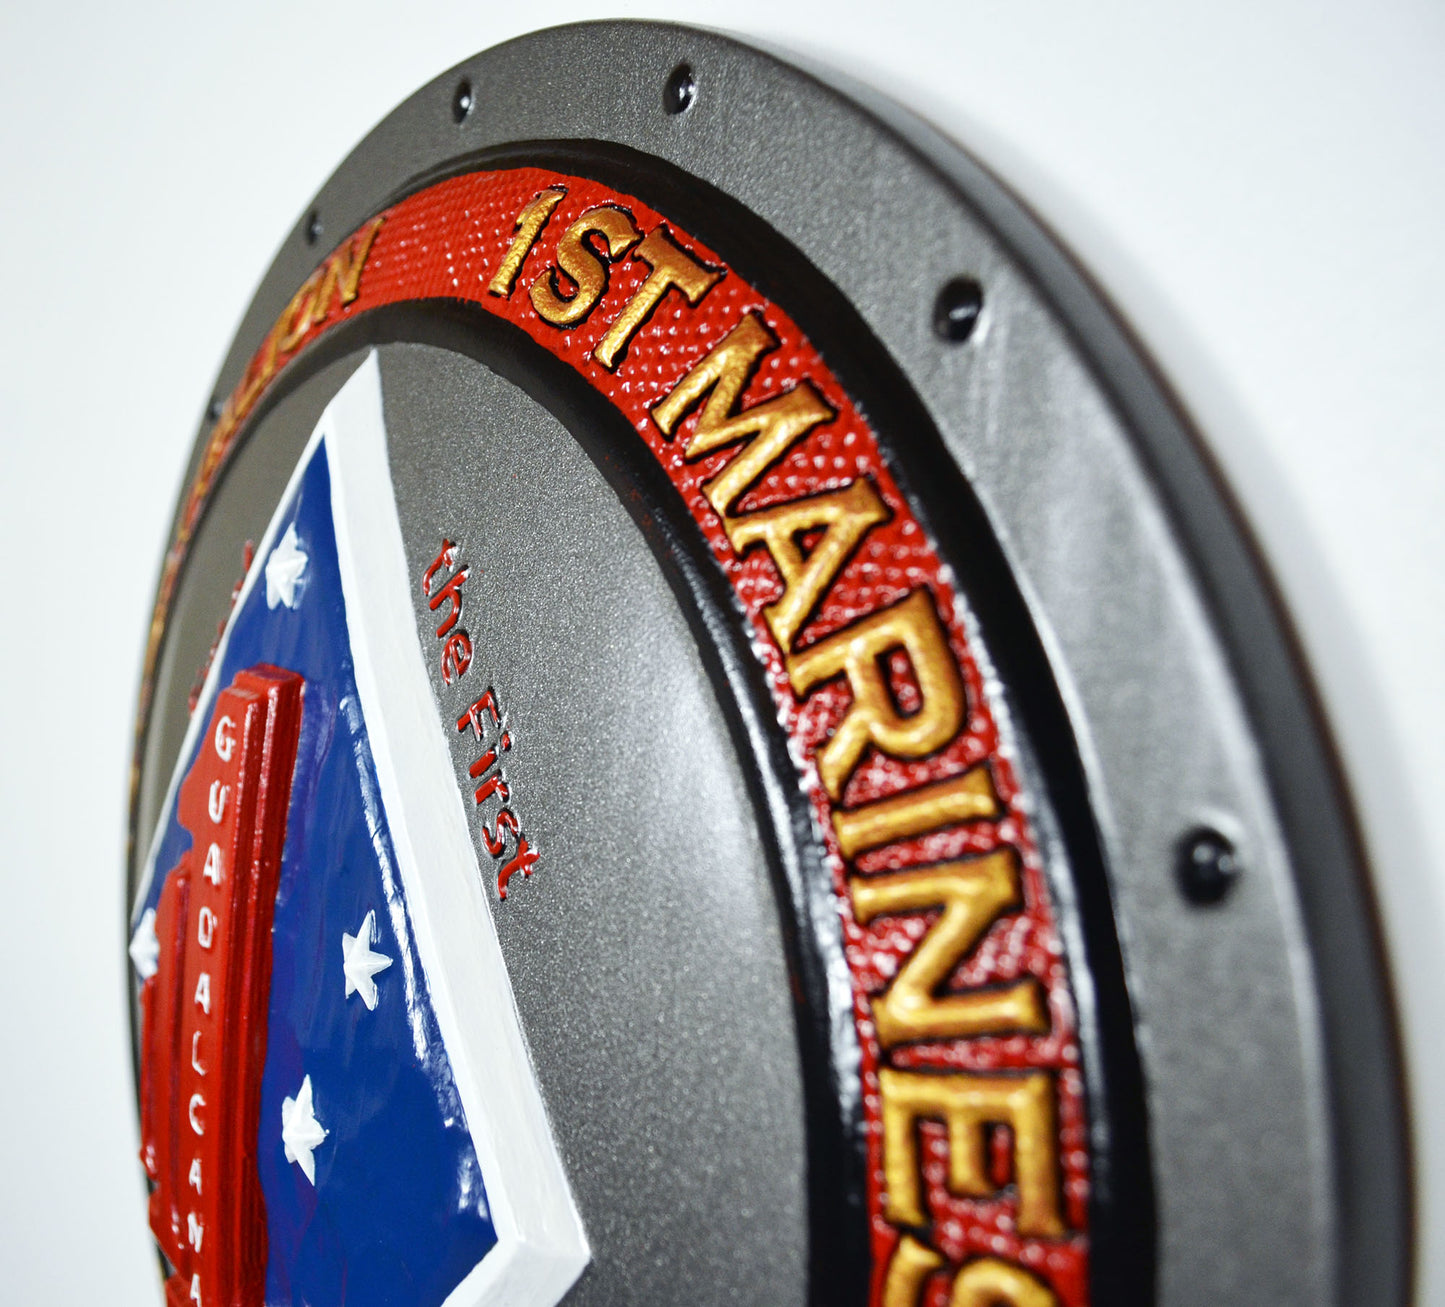 USMC 1st Battalion 1st Marines, 1st of the 1st Marine Corps, 3d wood carving, painted military plaque